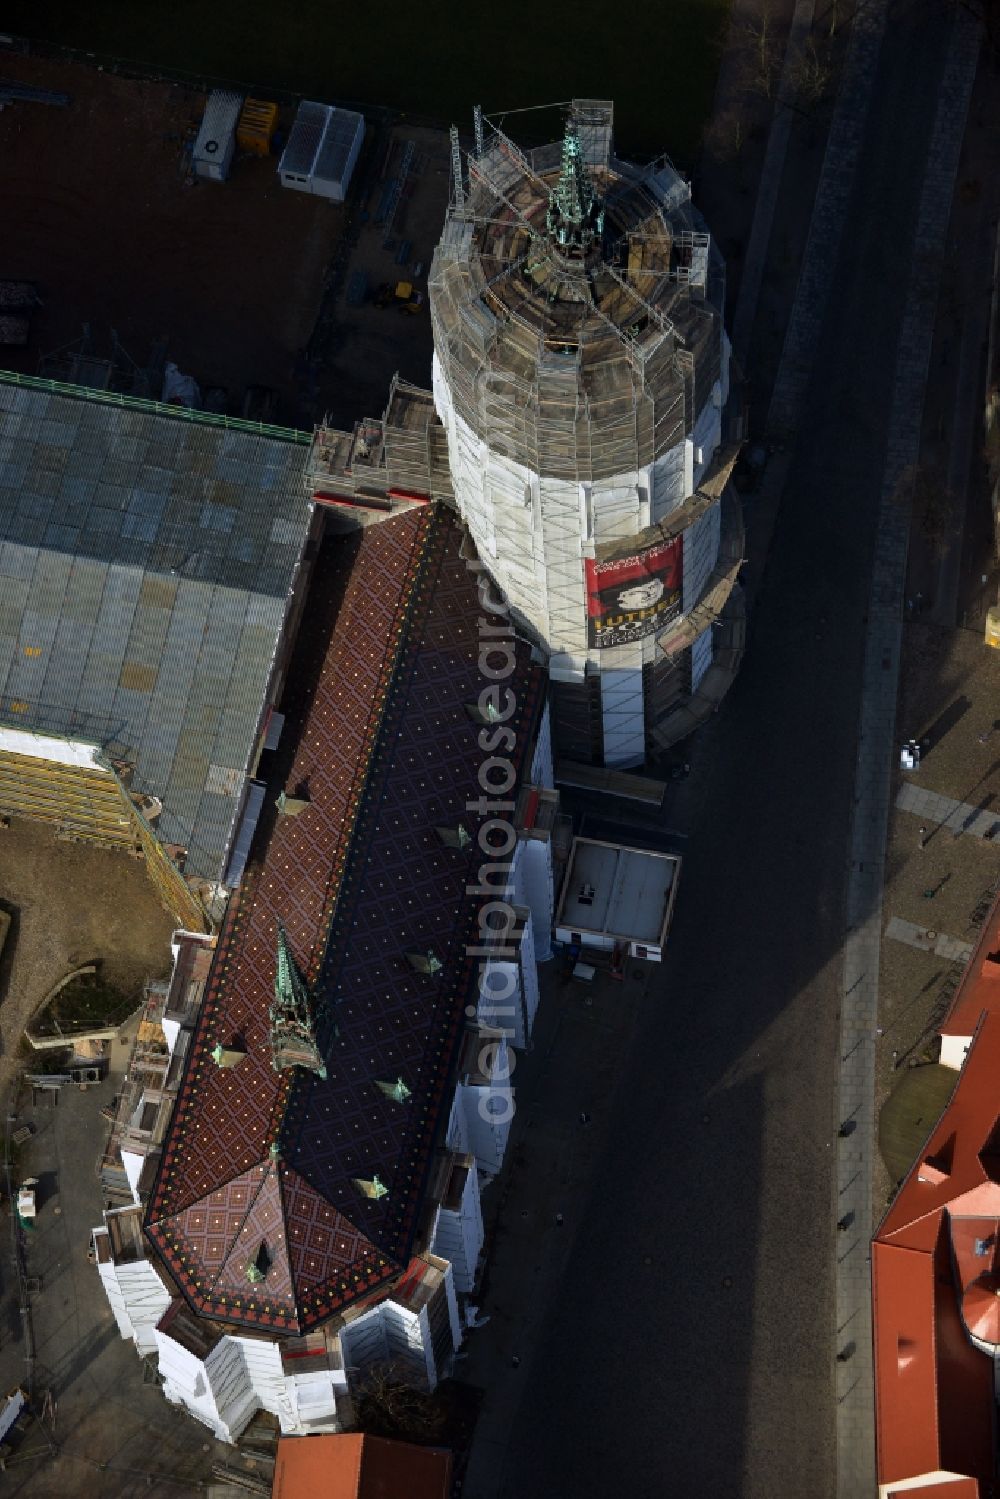 Aerial image Wittenberg - View of the castle church of Wittenberg. The castle with its 88 m high Gothic tower at the west end of the town is a UNESCO World Heritage Site. The first mention of the castle dates from 1187. It gained fame as in 1517 the Wittenberg Augustinian monk and theology professor Martin Luther spread his 95 disputation